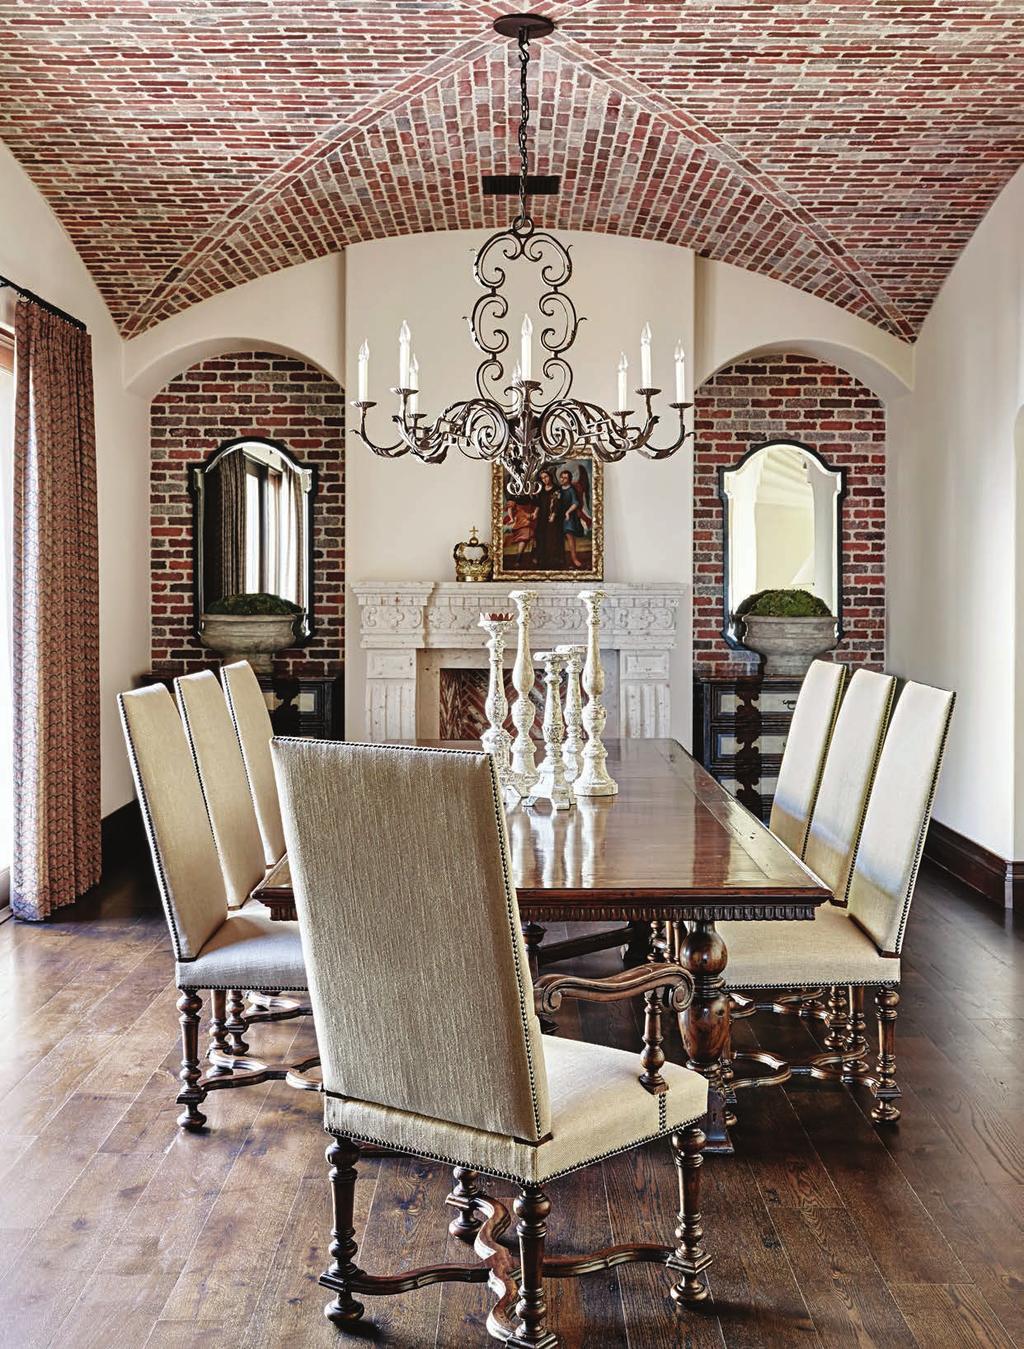 Brick lends rich, textural color and Spanish-style substance to a groin-vault ceiling and arched